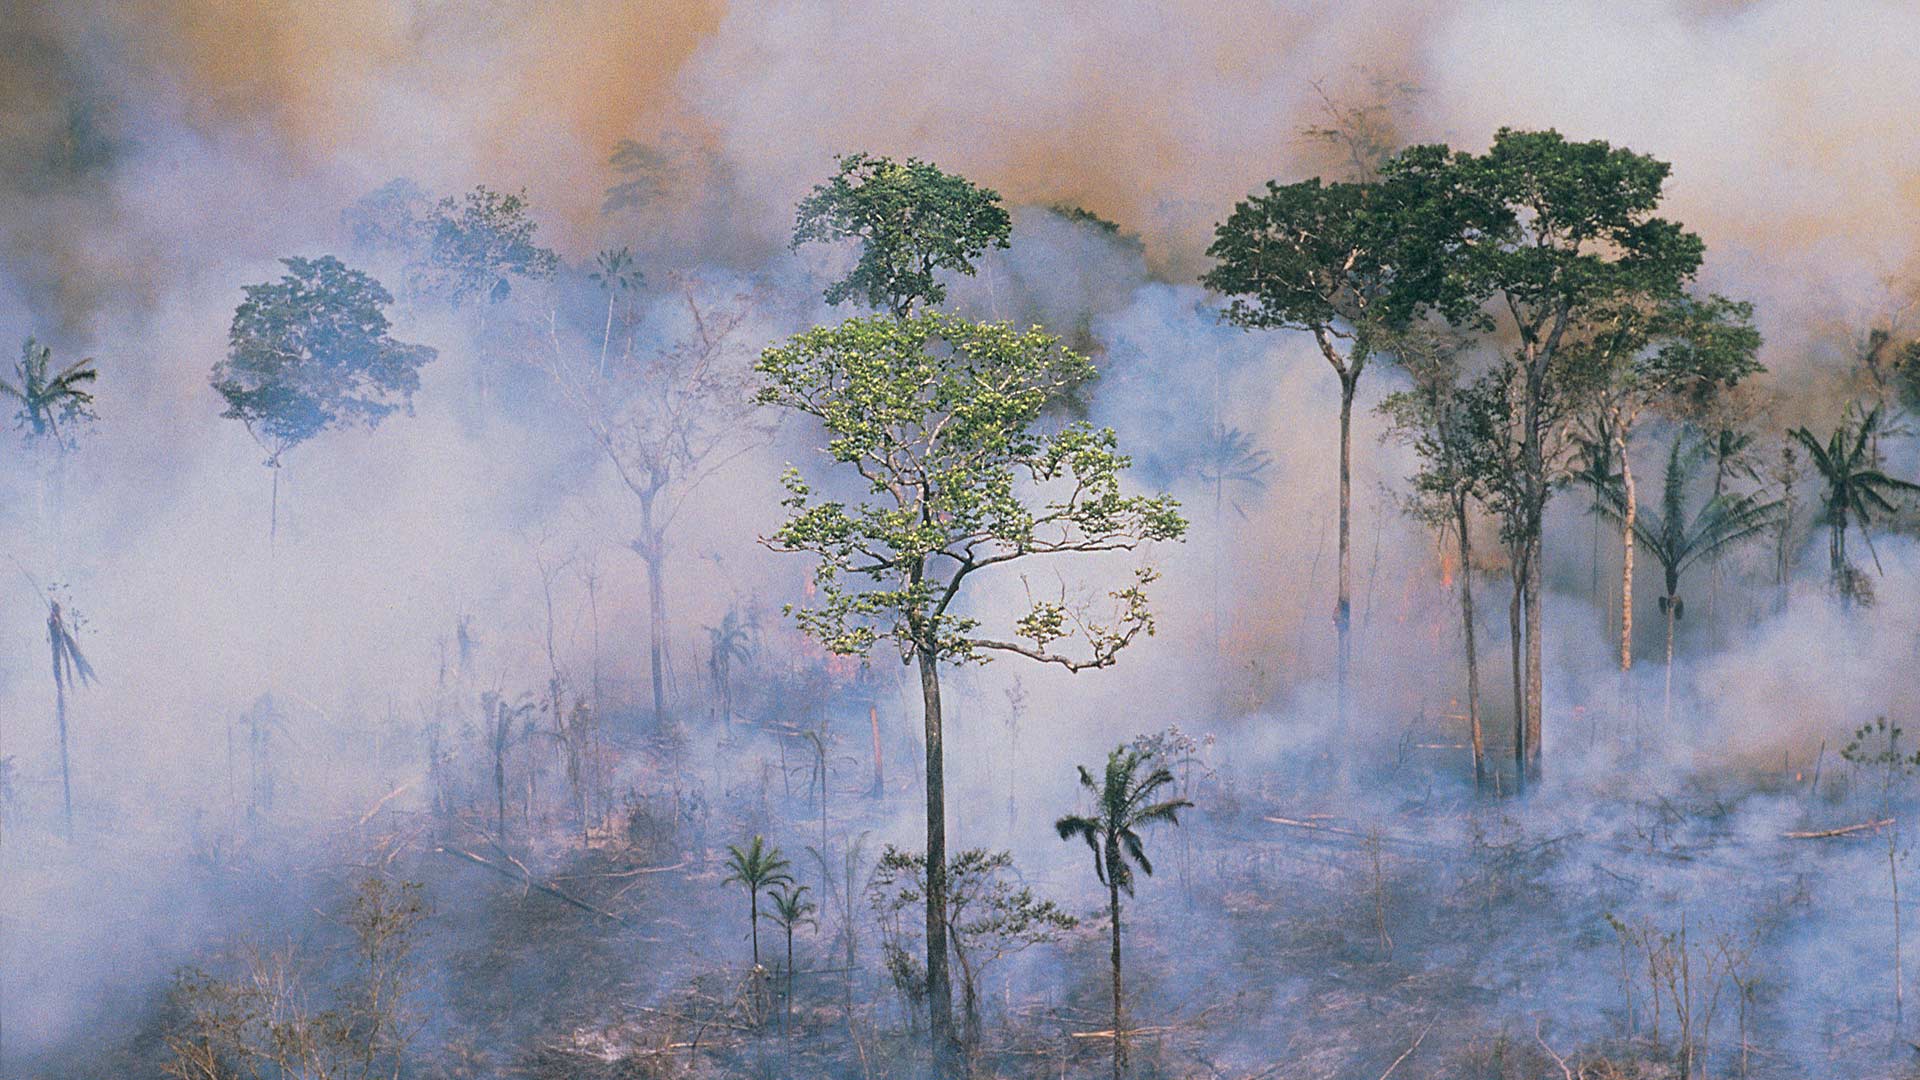  Amazon fires, Global Deforestation and what we are doing about it